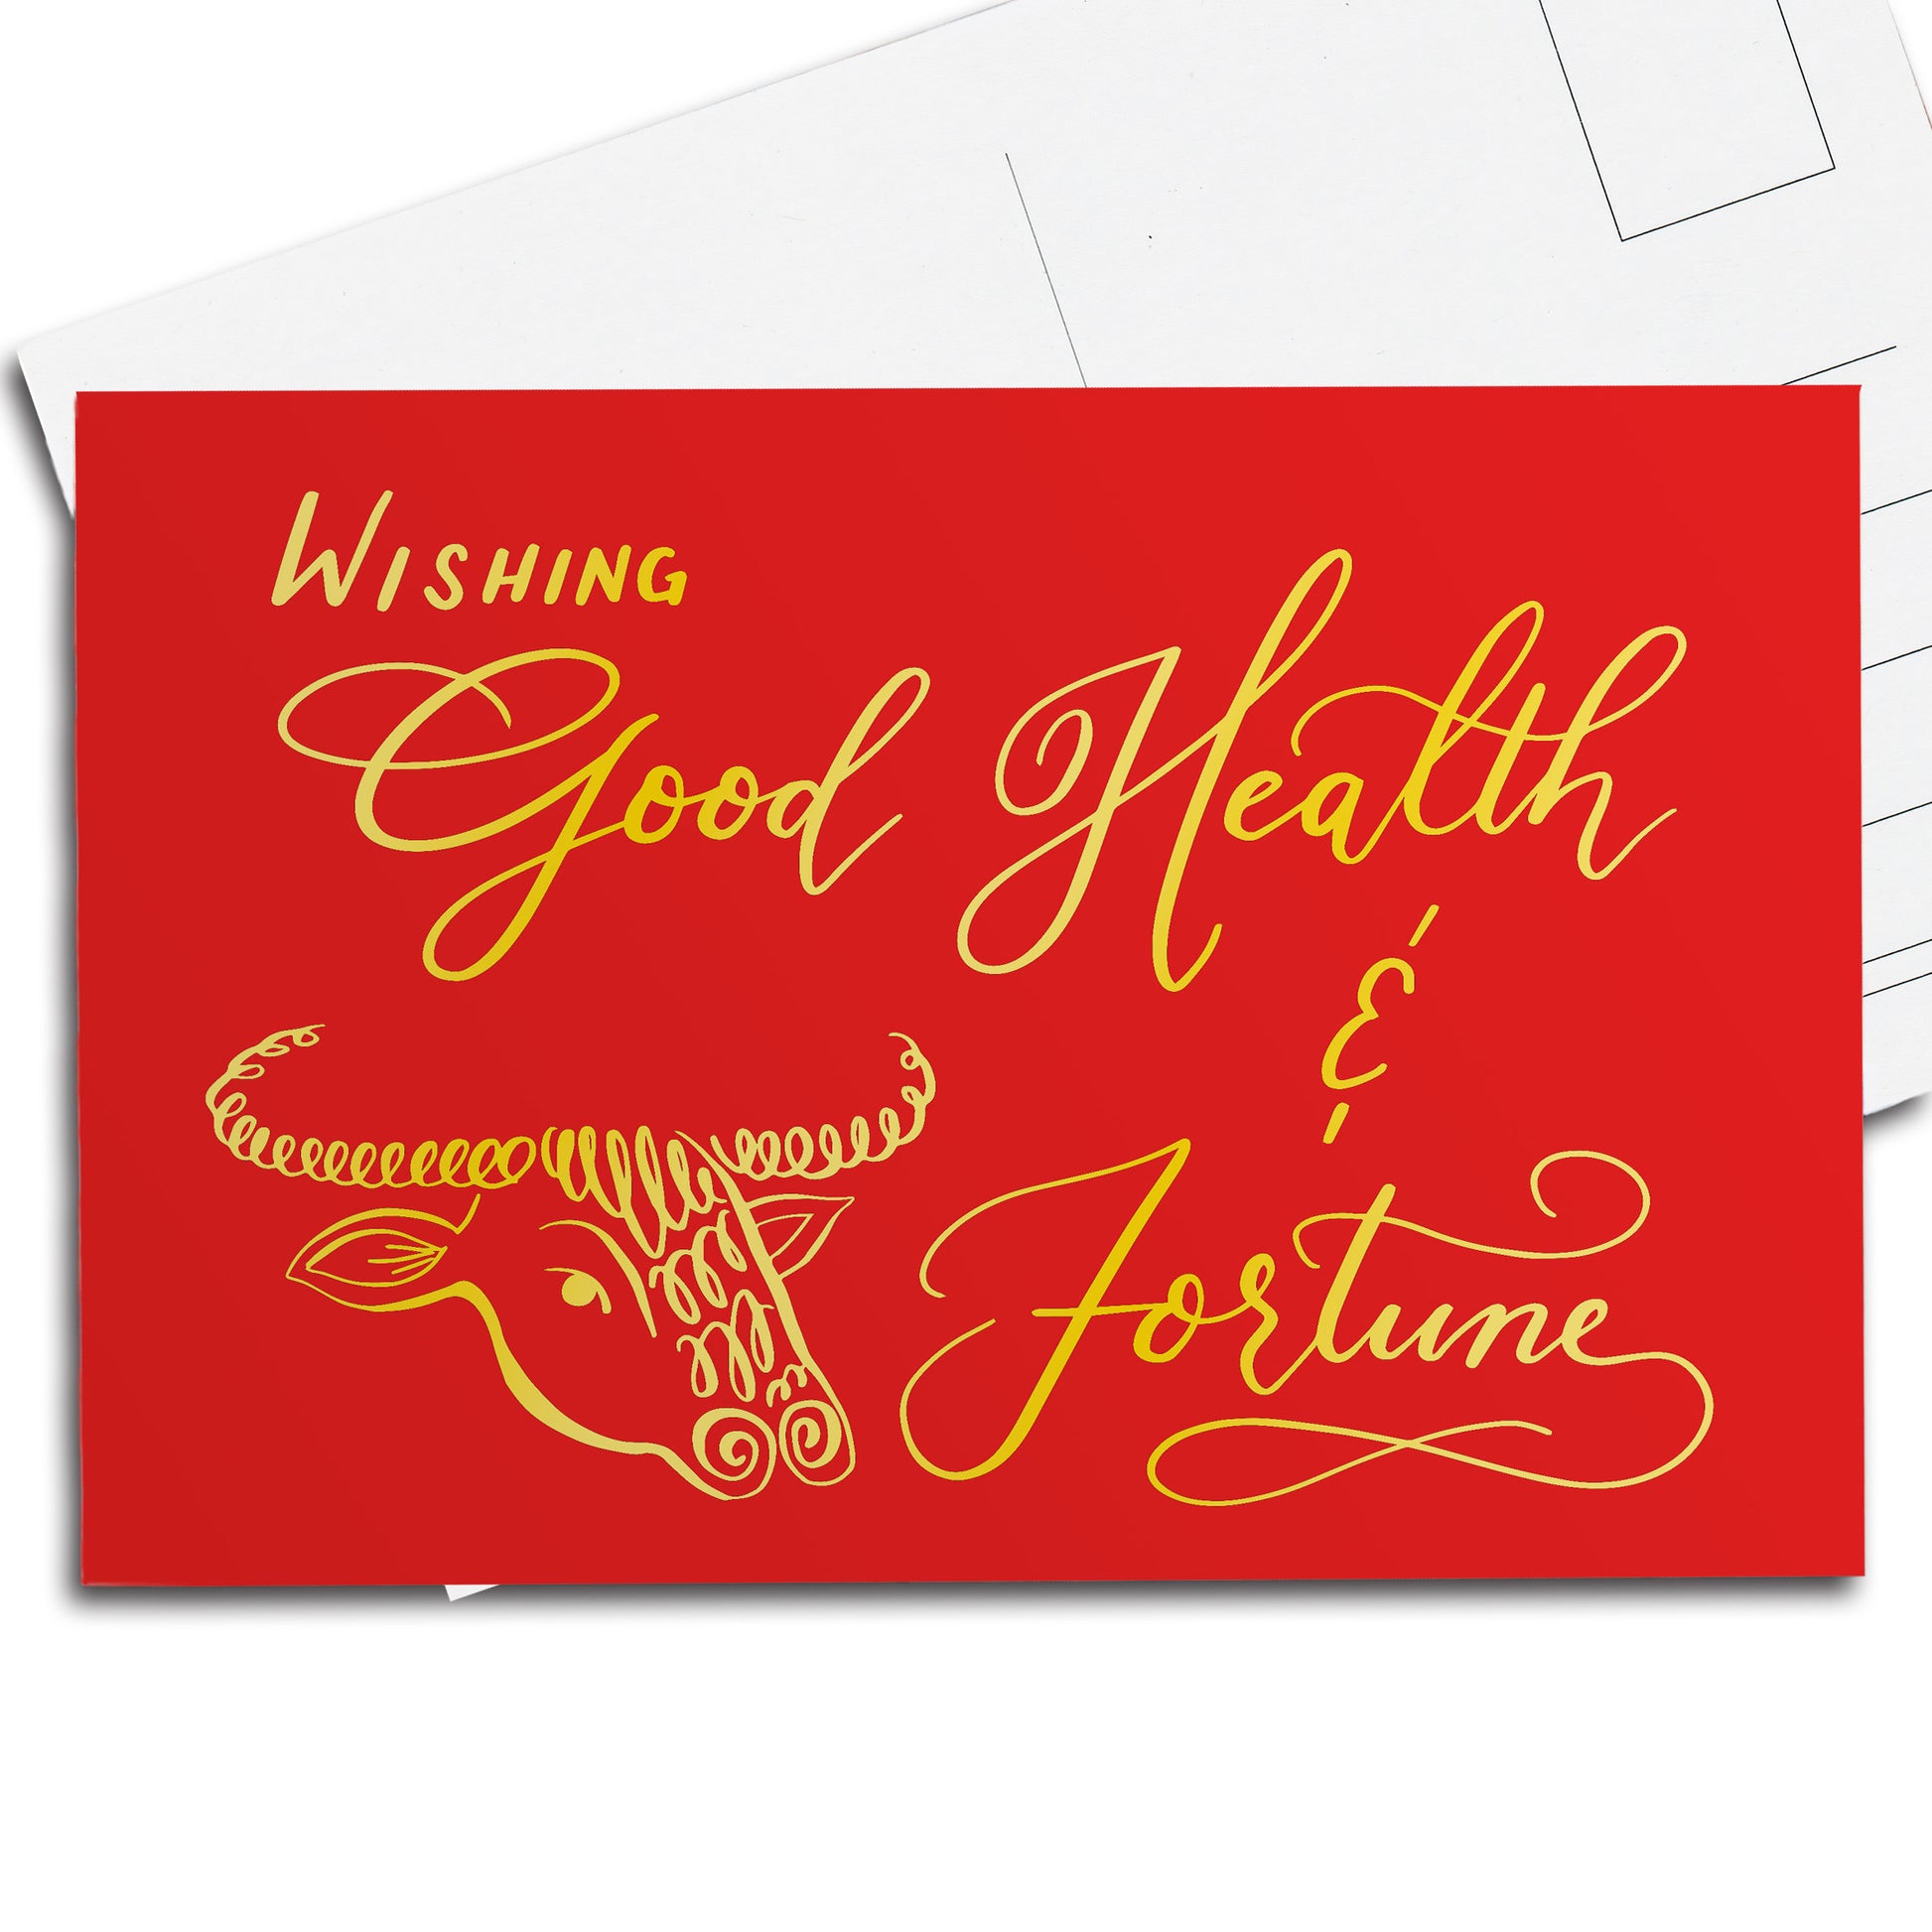 A thumbnail view of the postcard: "Wishing Good Health and Fortune"